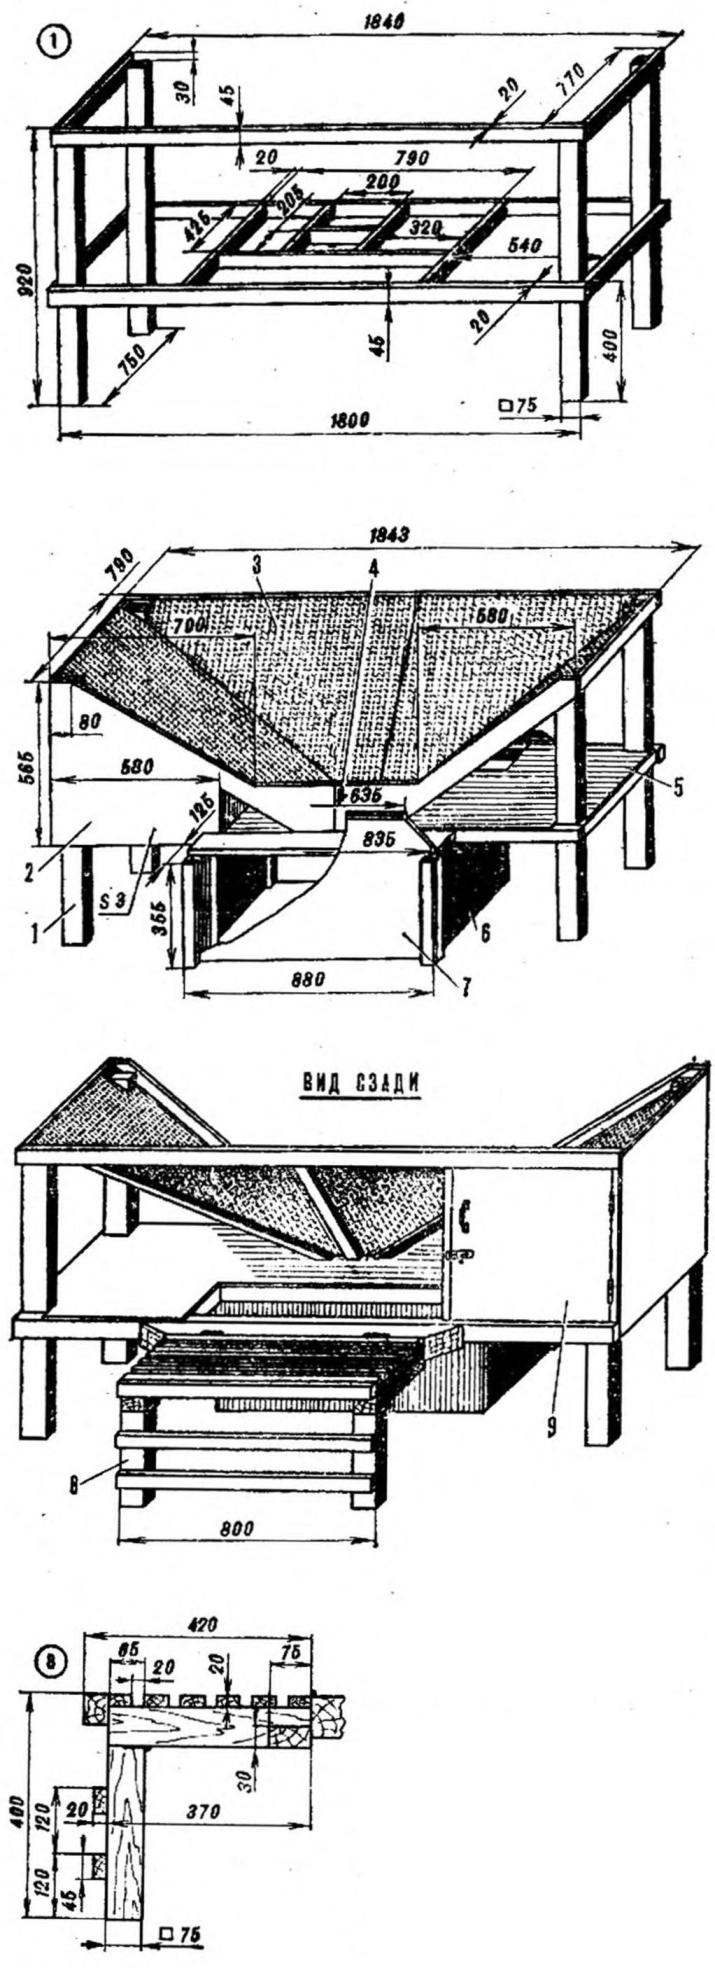 Fig. 2. Stand